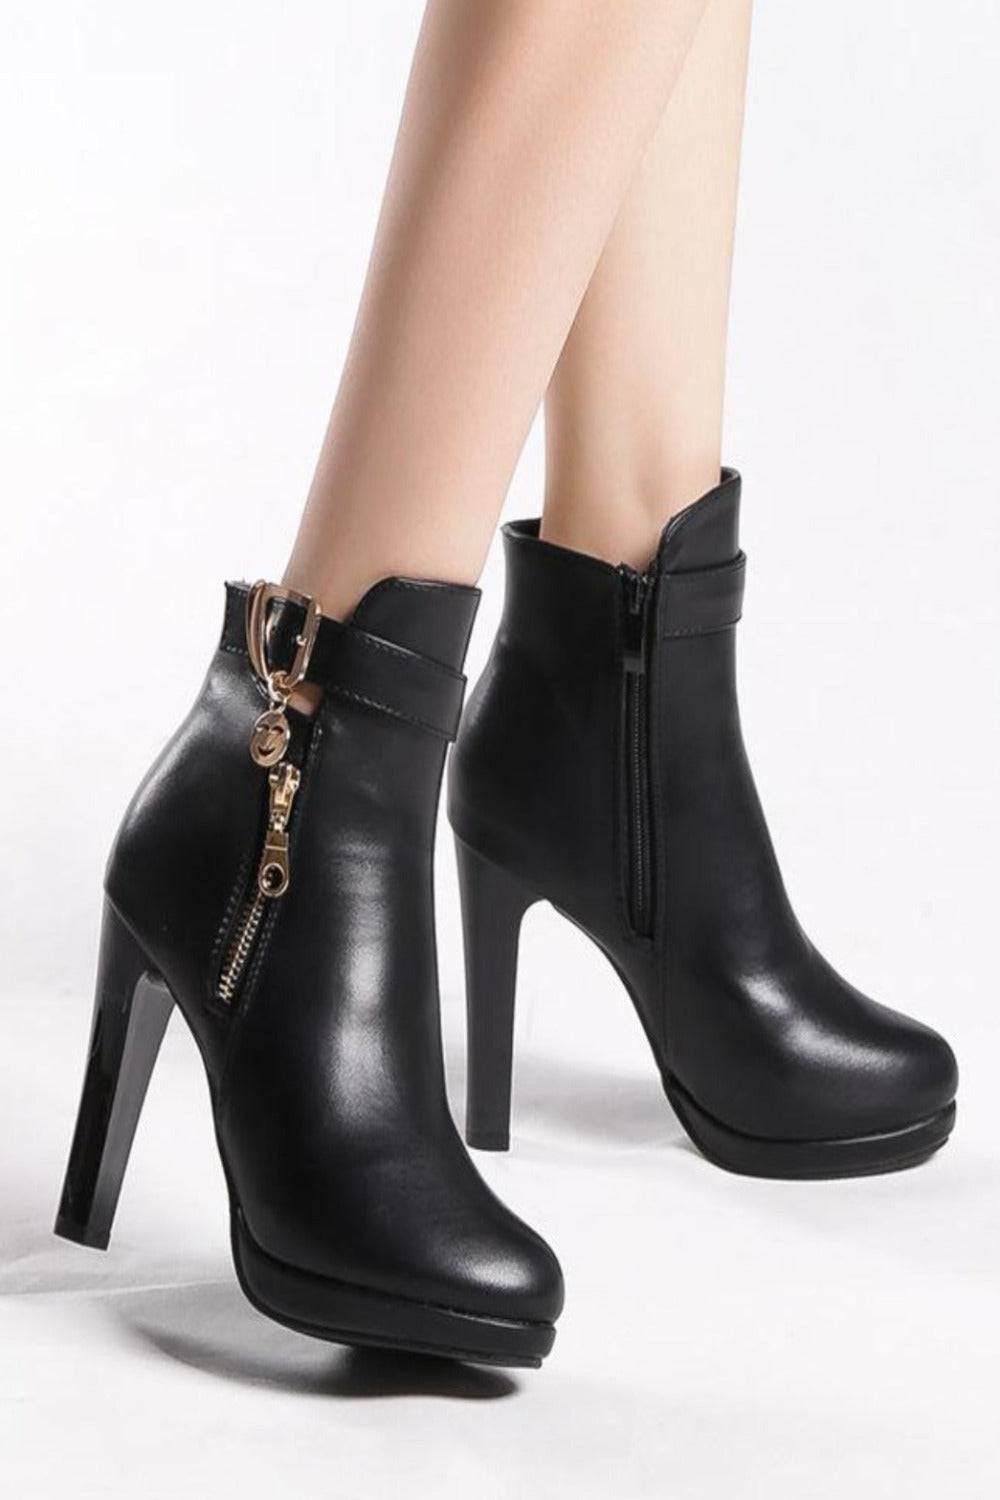 What are the most comfortable and stylish women's ankle boots for everyday  wear? - Quora